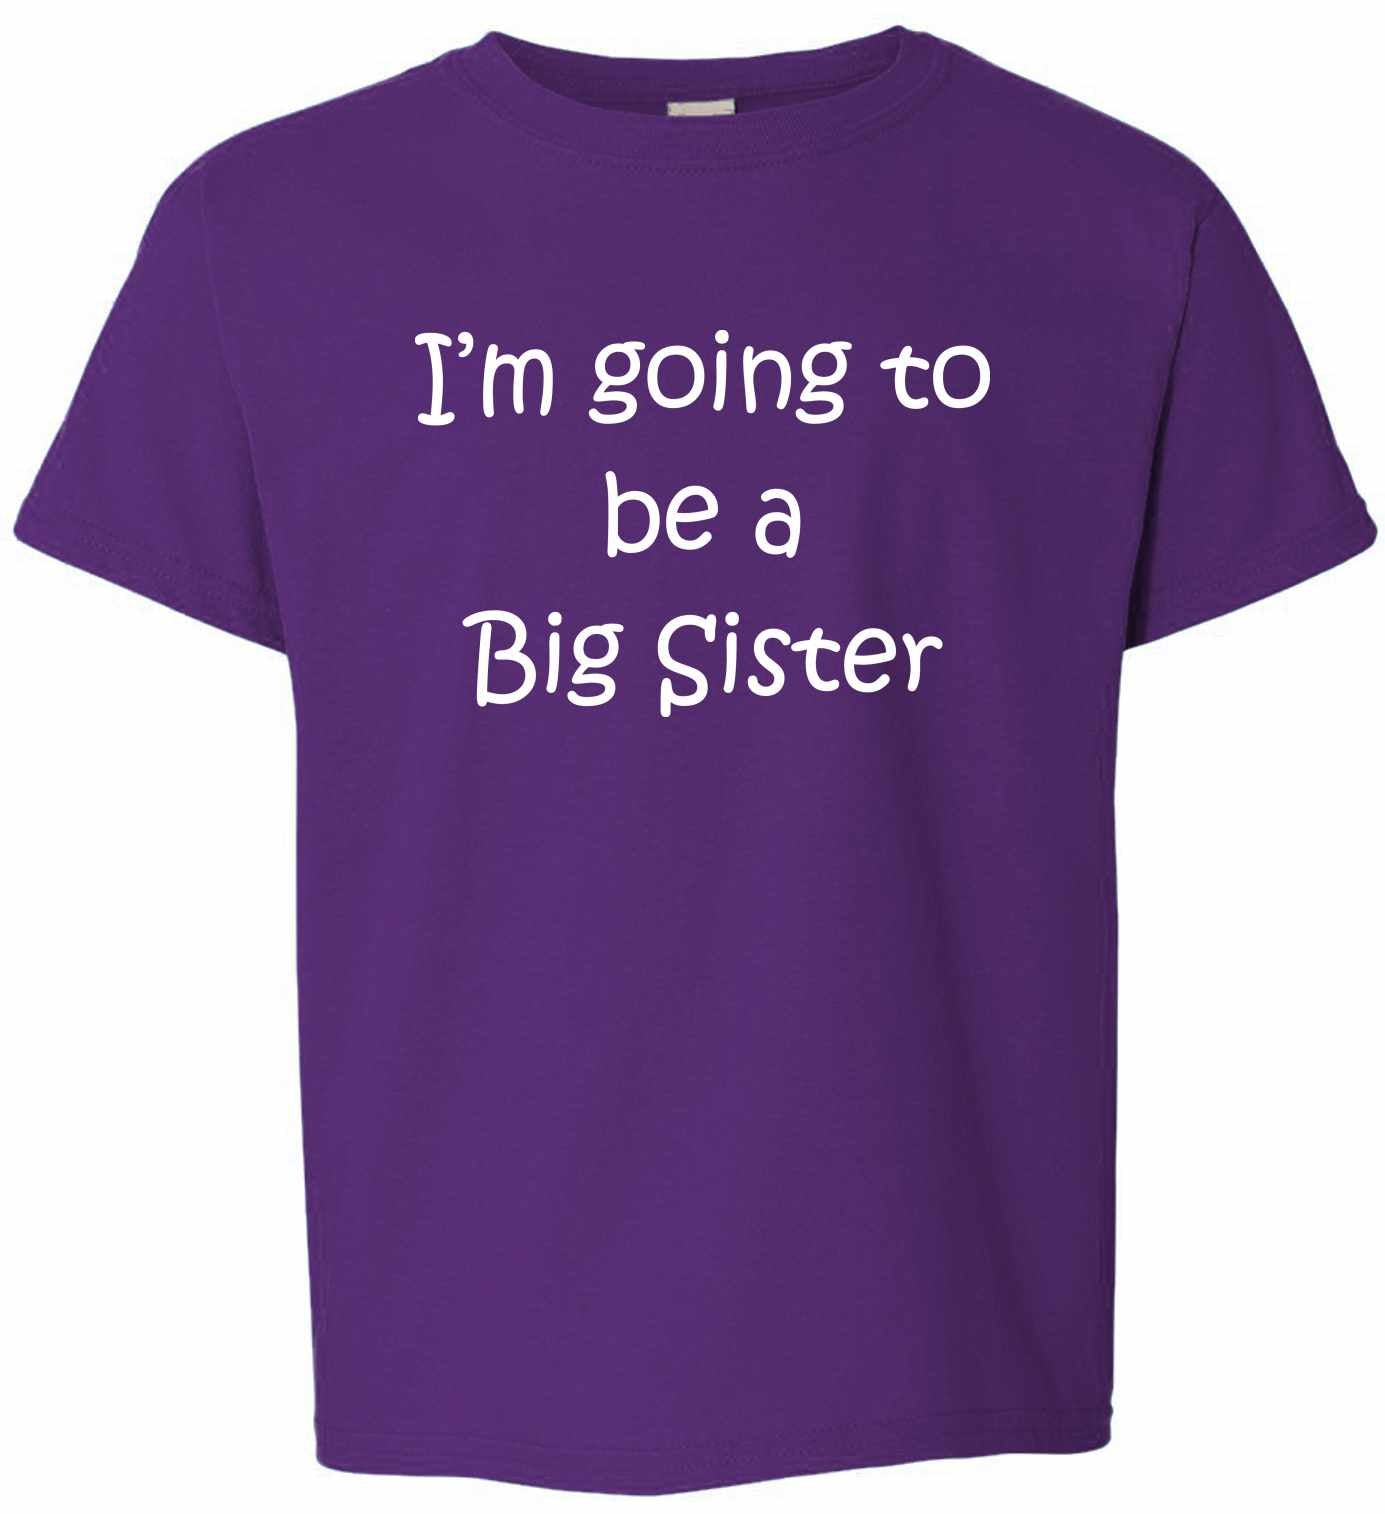 I'M GOING TO BE A BIG SISTER on Kids T-Shirt